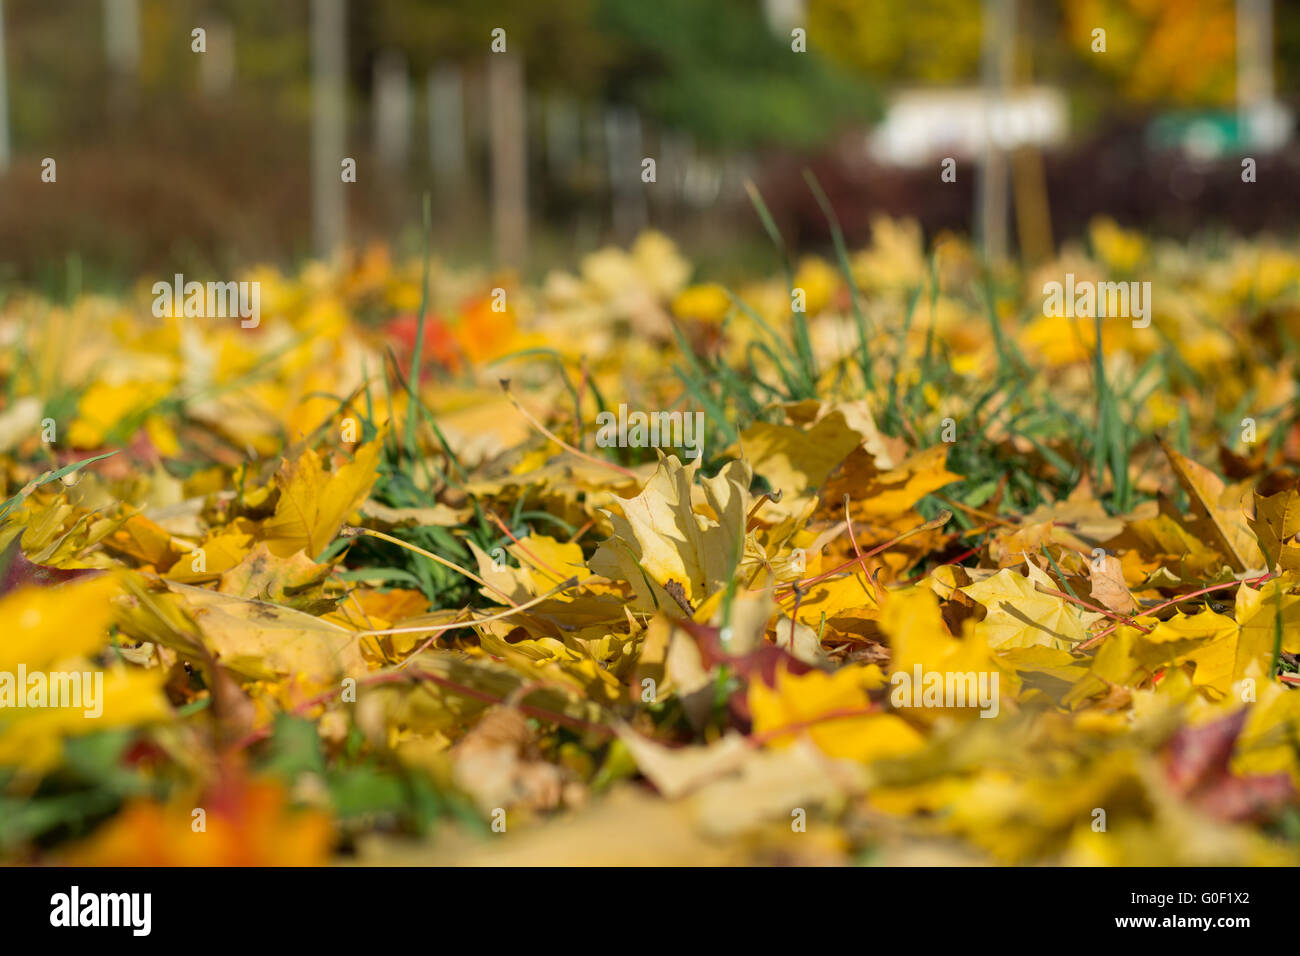 enchanting colors of autumn leaves Stock Photo